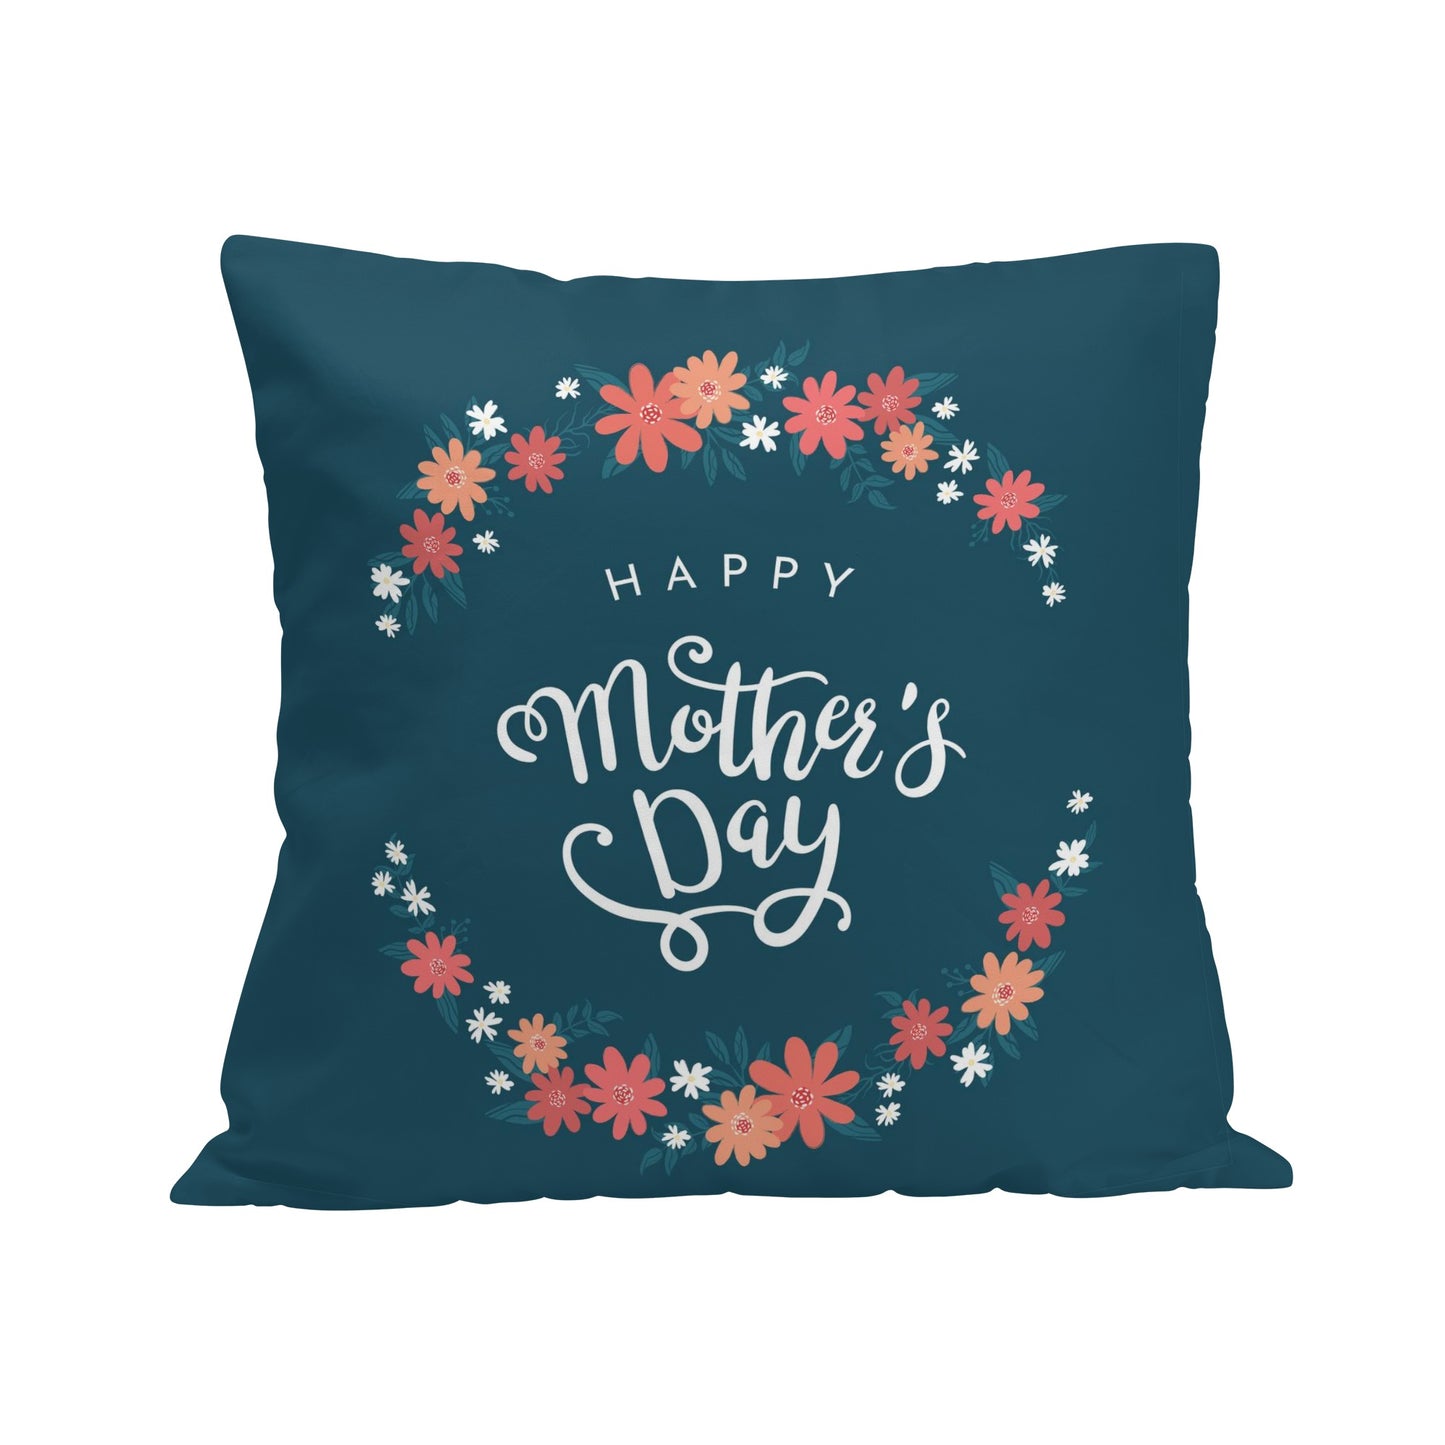 Happy Mothers Day Collection Pillow Covers Let the Giving Begin